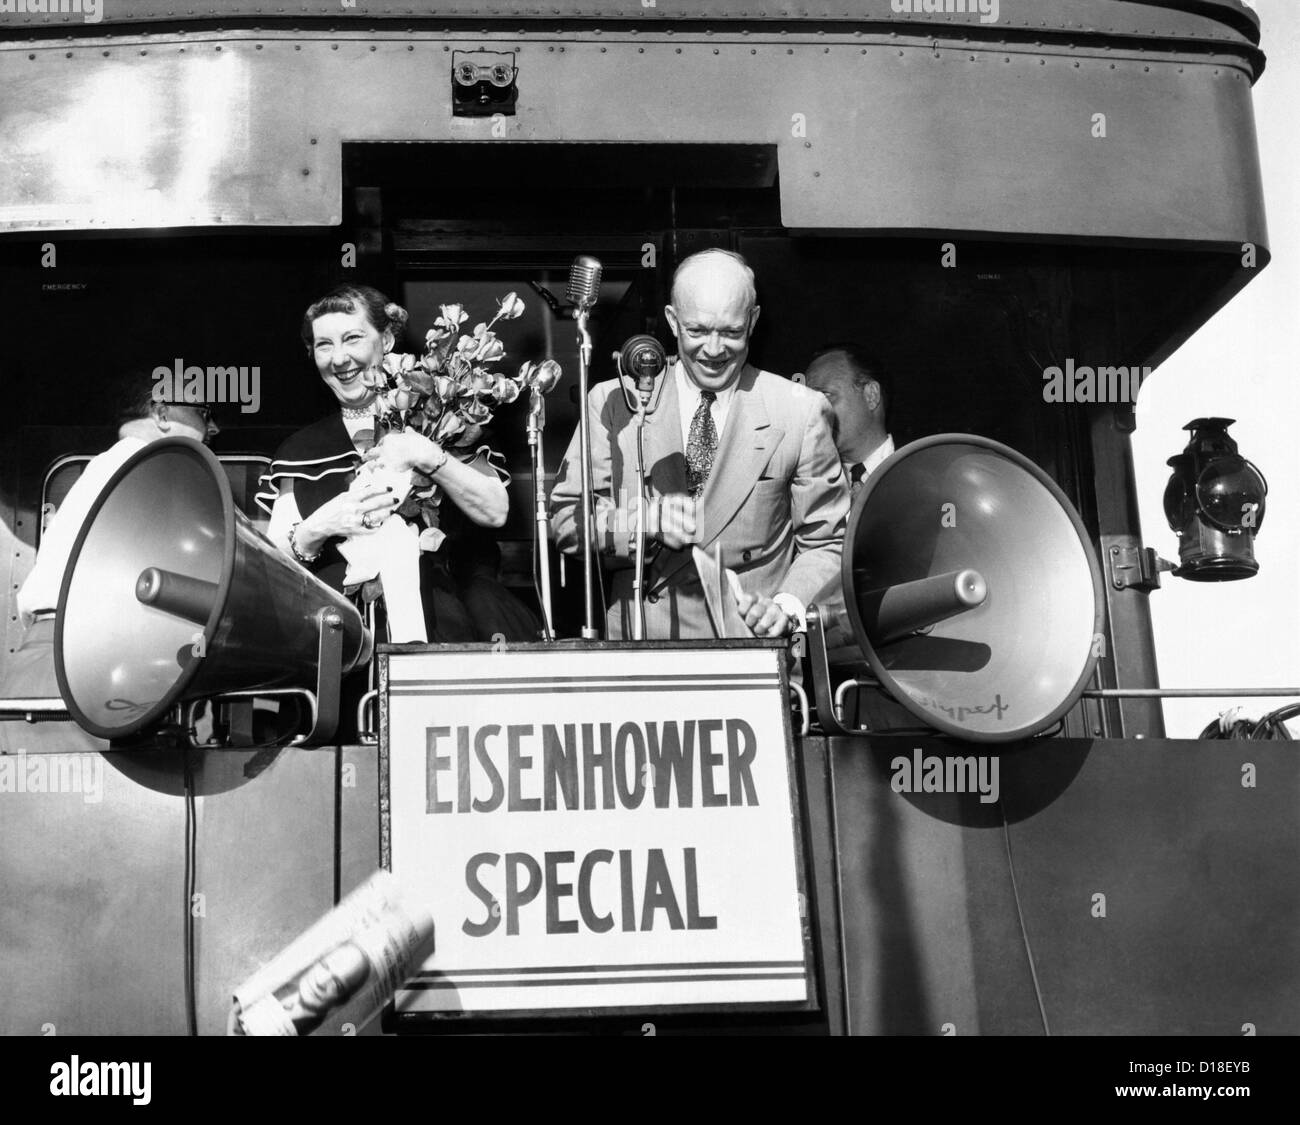 Republican candidate for president Dwight Eisenhower and his wife campaigning on the Eisenhower Special during 1952 election. Stock Photo